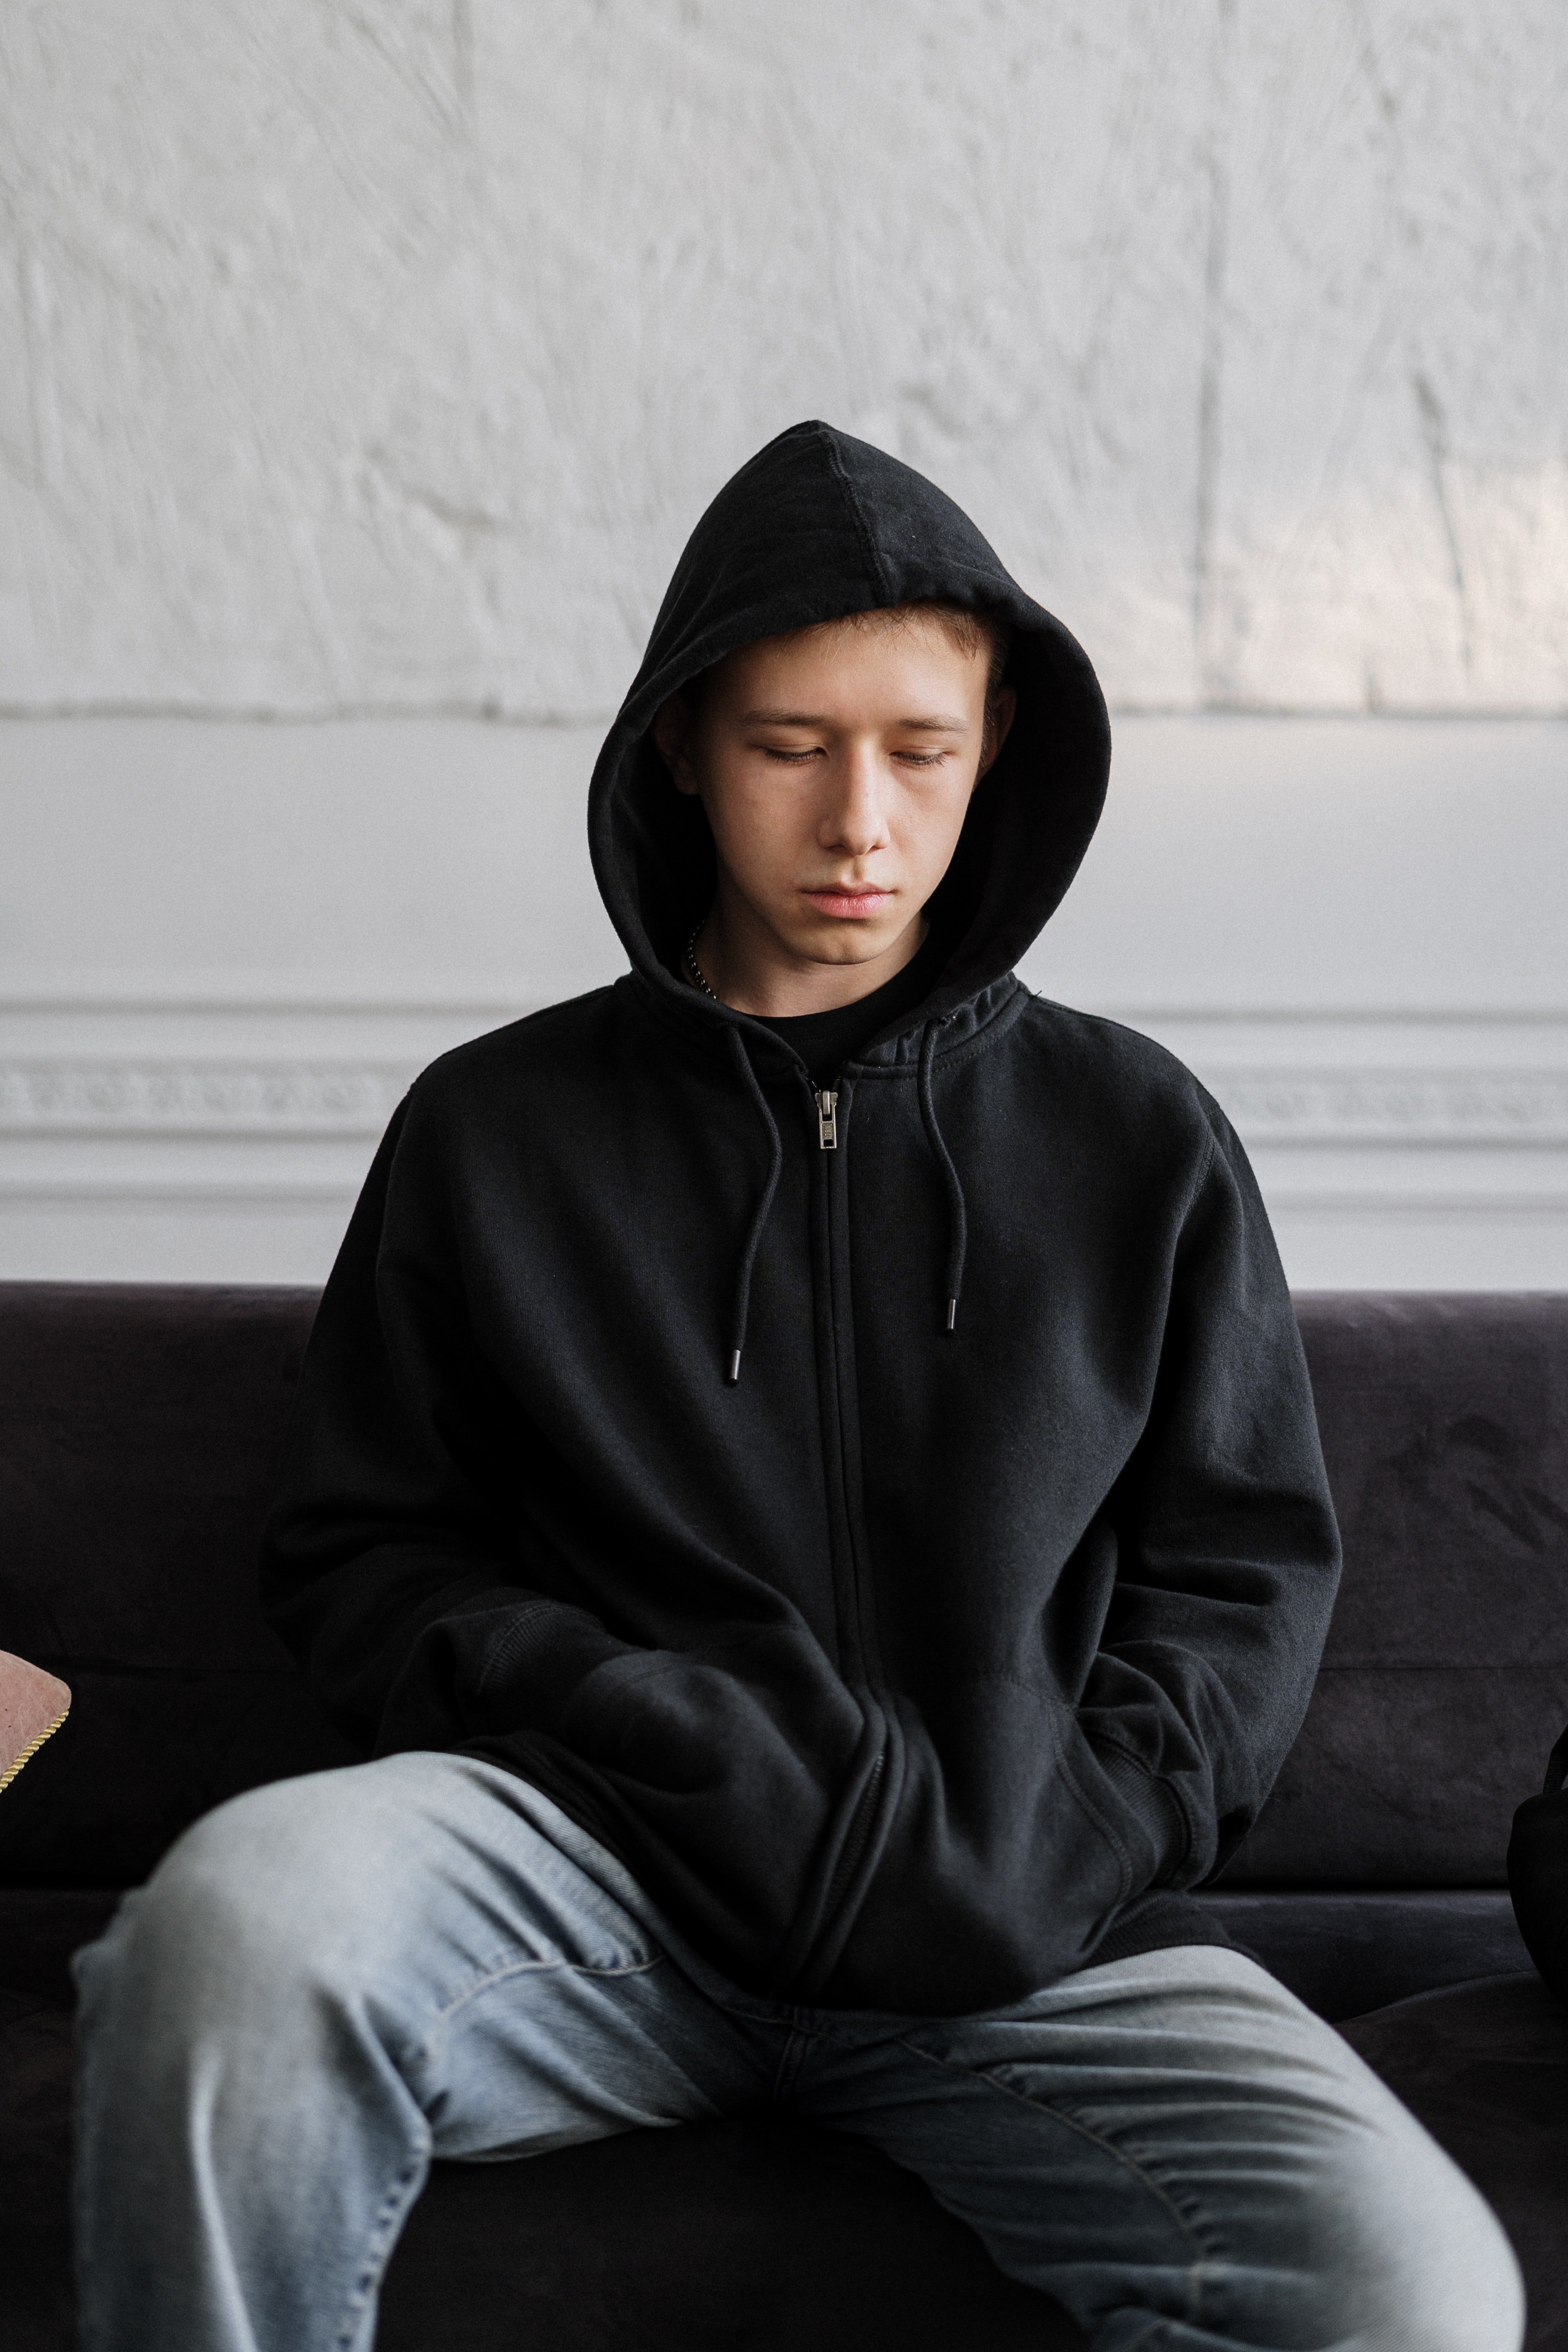 A boy in a Black hoodie sitting on a couch. | Source: Pexels